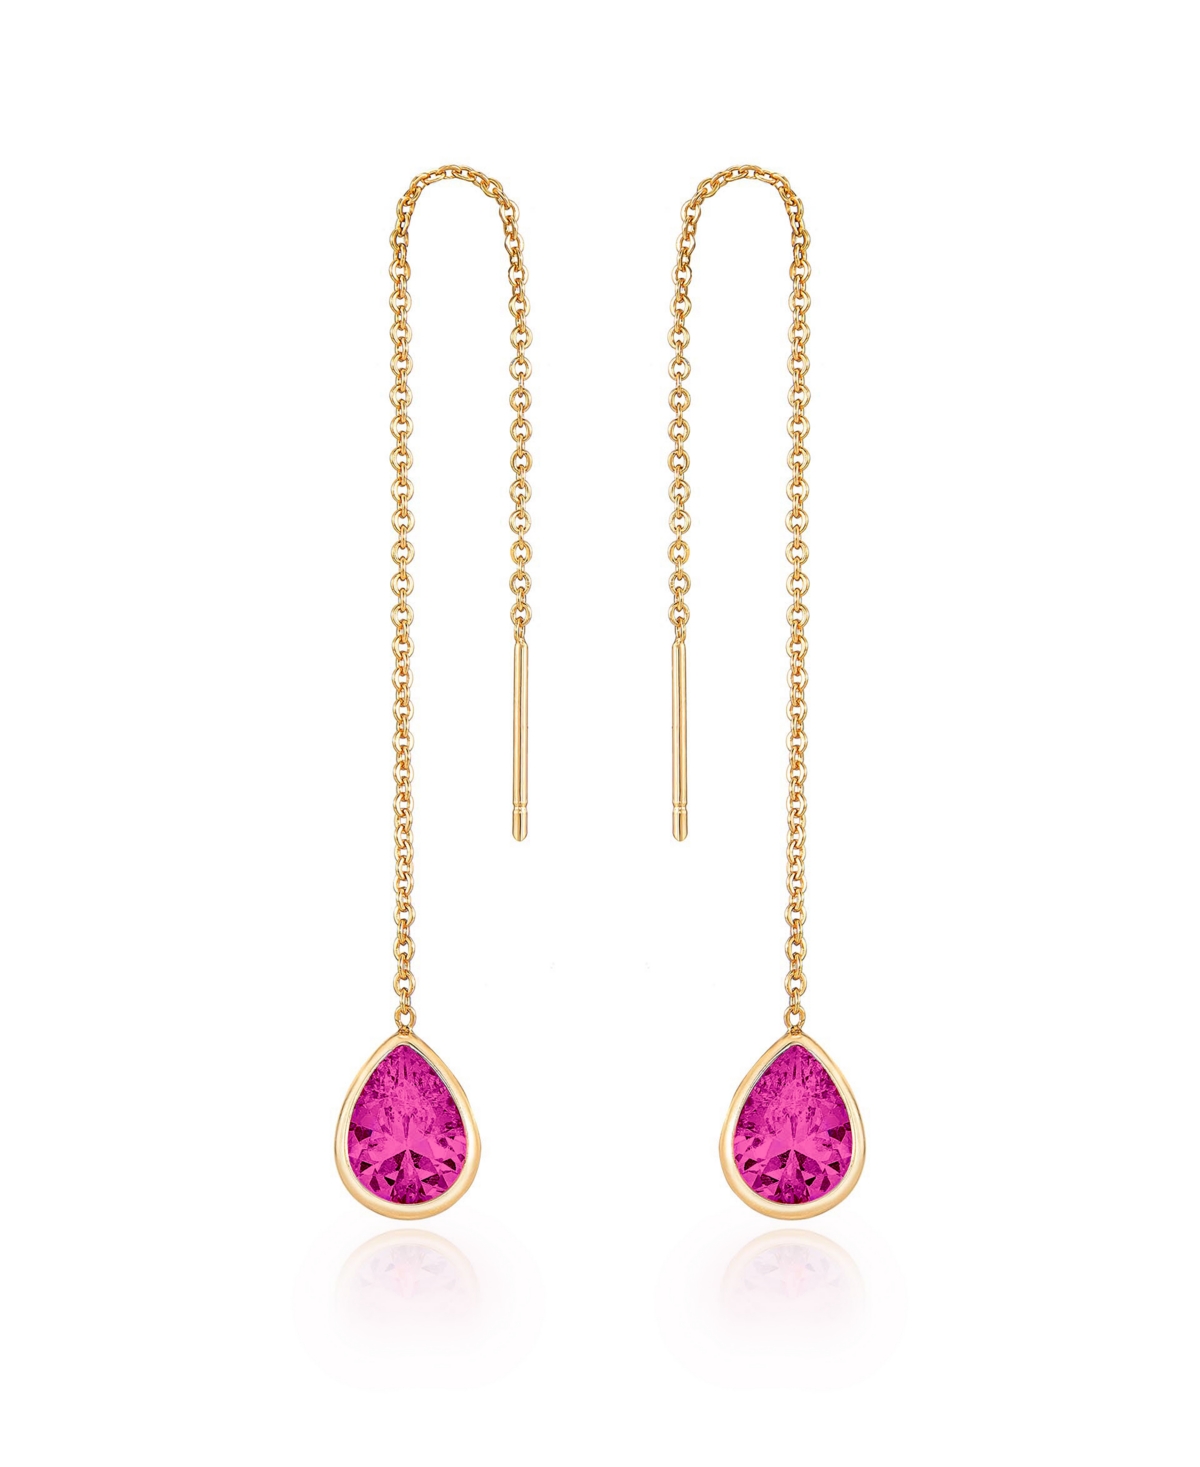 Gold Plated Chain and Crystal Dangle Earrings - Fuchsia